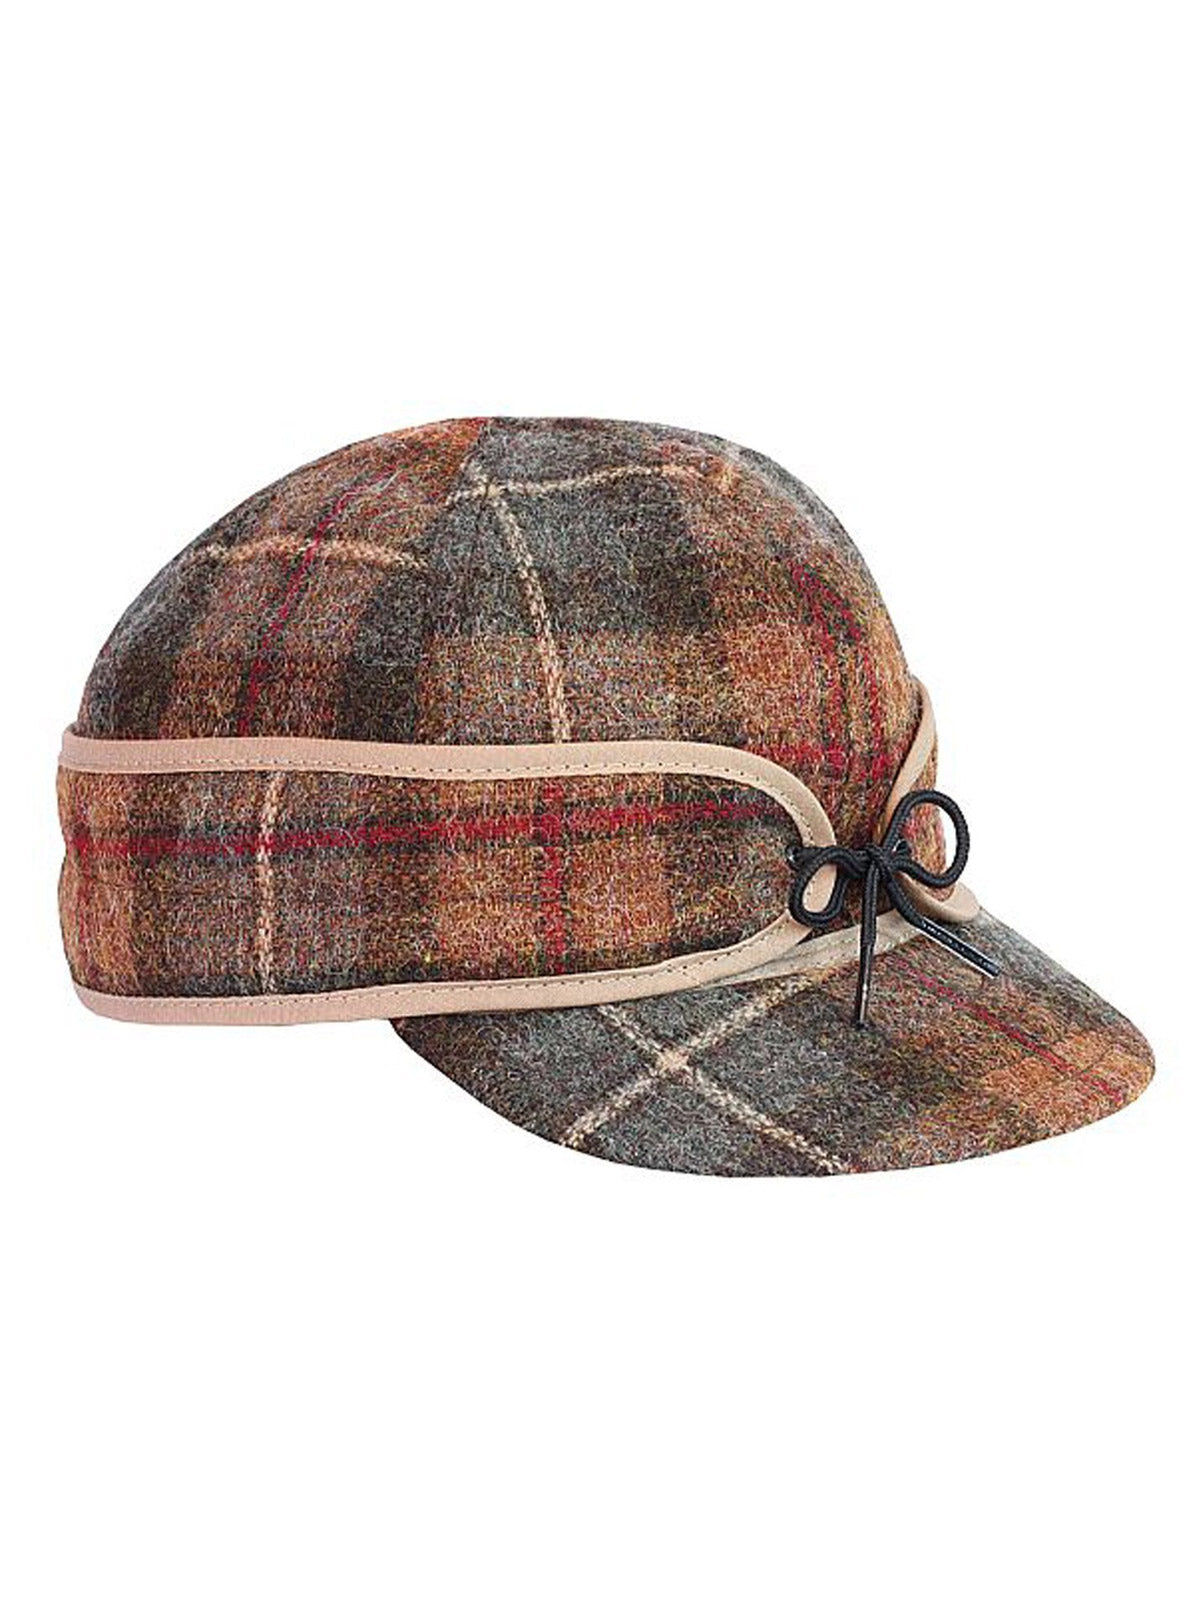 Origional Stormy Kromer Caps With Ear Band in Partridge Plaid - 50010-PTG